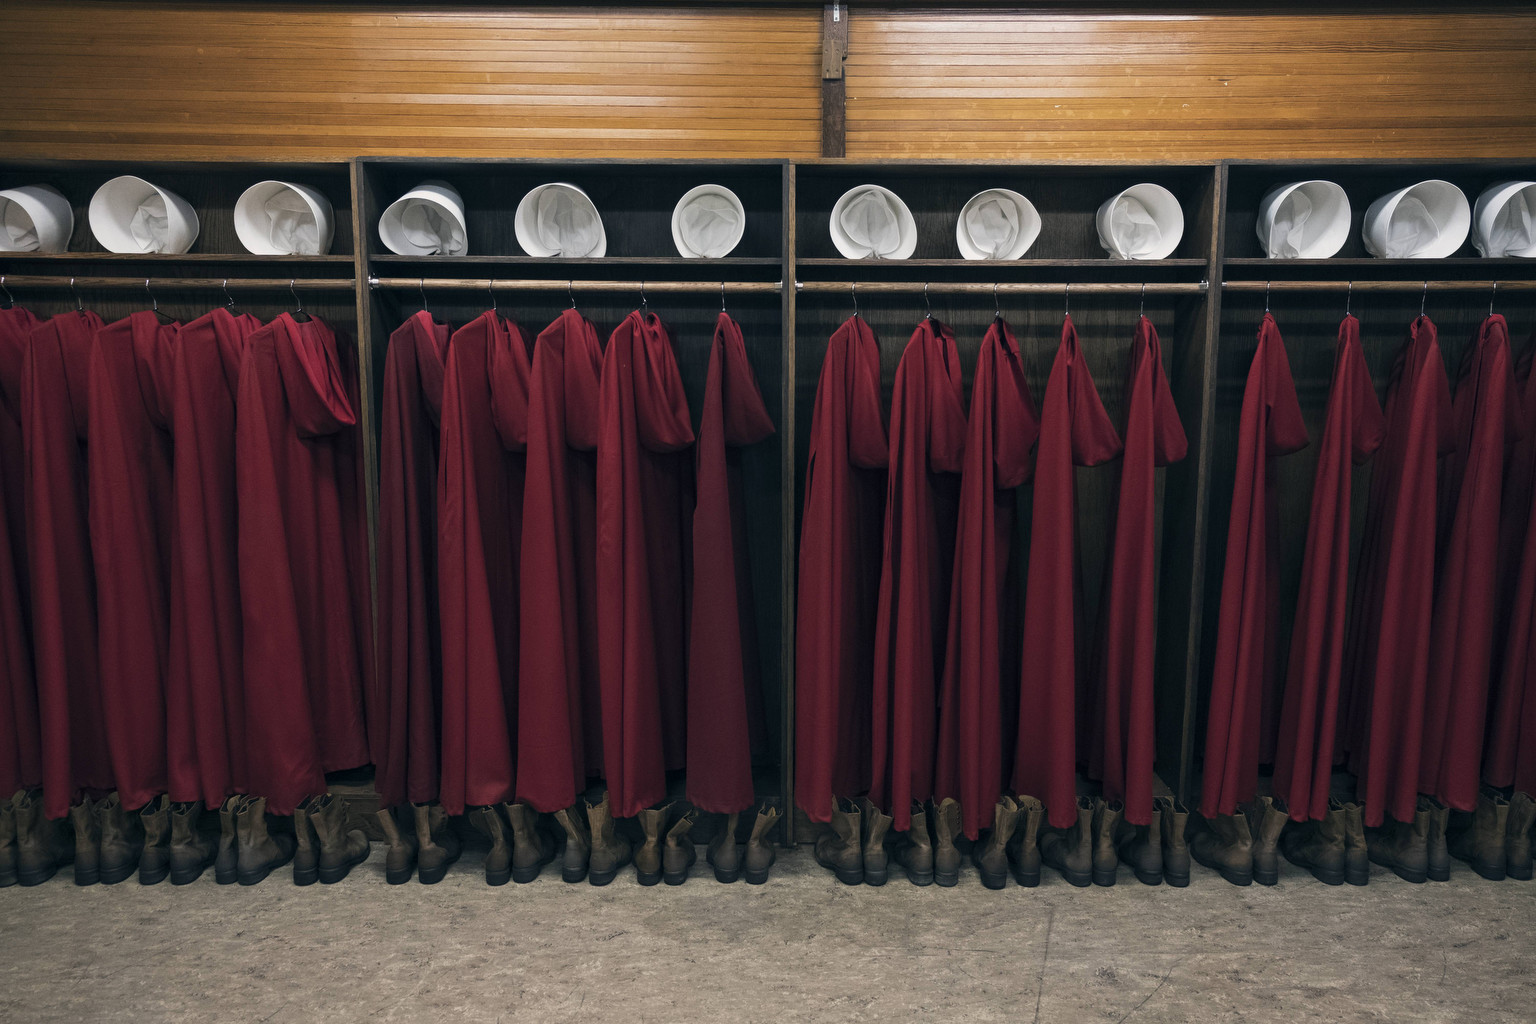 A closet full of cloaks and wings.